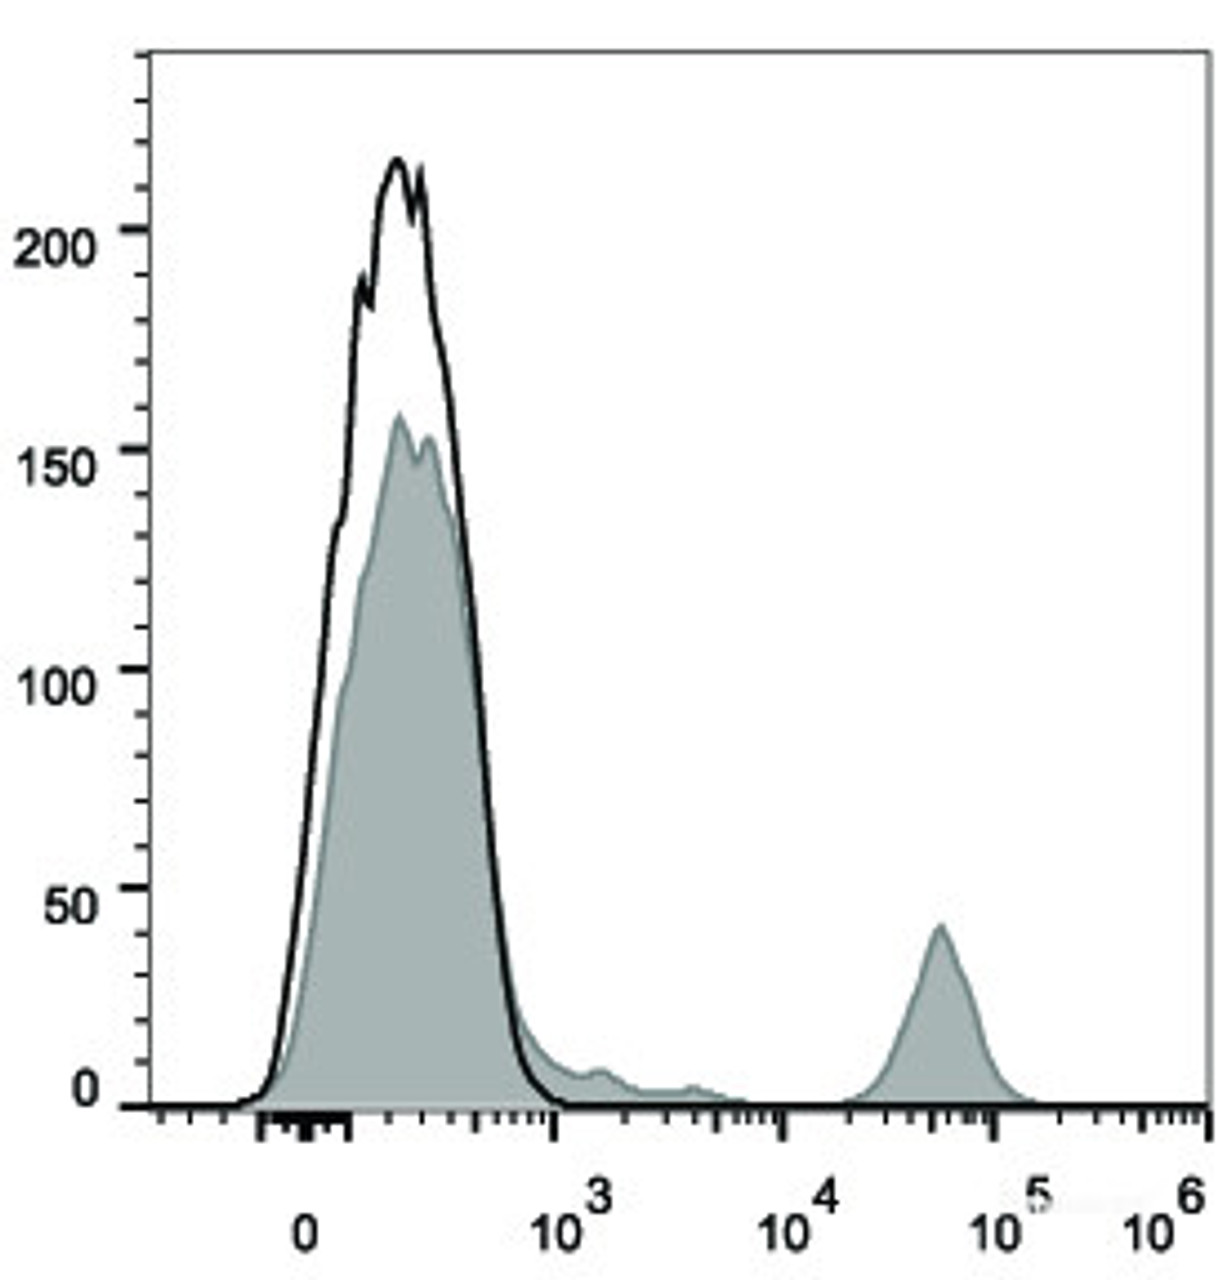 Human peripheral blood lymphocytes are stained with FITC Anti-Human CD2 Antibody(filled gray histogram). Unstained lymphocytes (empty black histogram) are used as control.